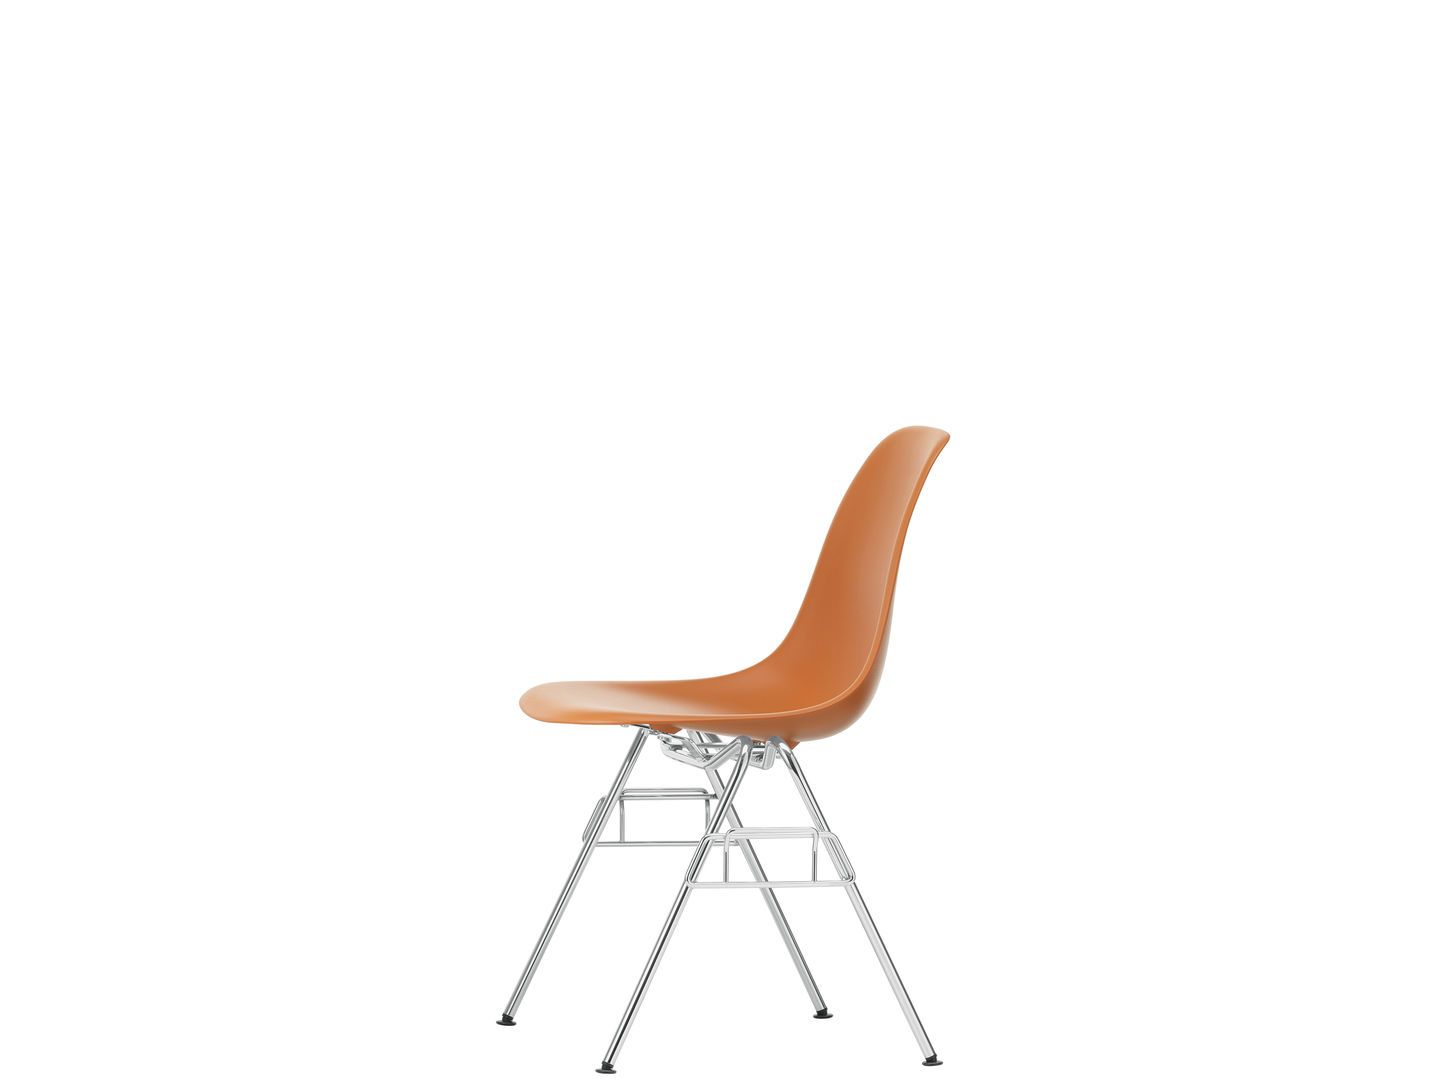 Eames Plastic Side Chair DSS-N | One52 Furniture 